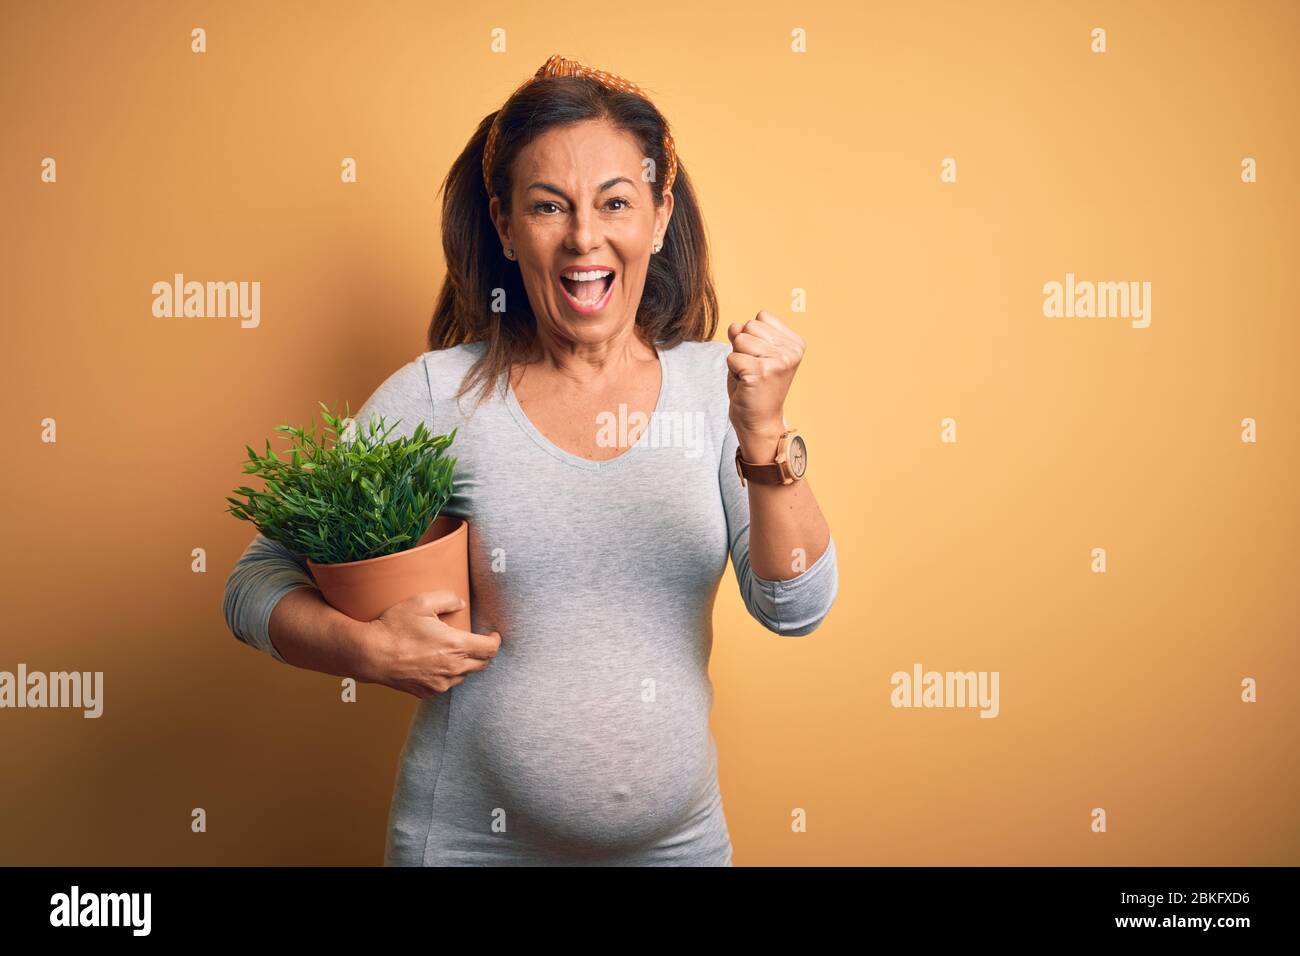 Middle age pregnant woman expecting baby holding plant pot screaming proud and celebrating victory and success very excited, cheering emotion Stock Photo